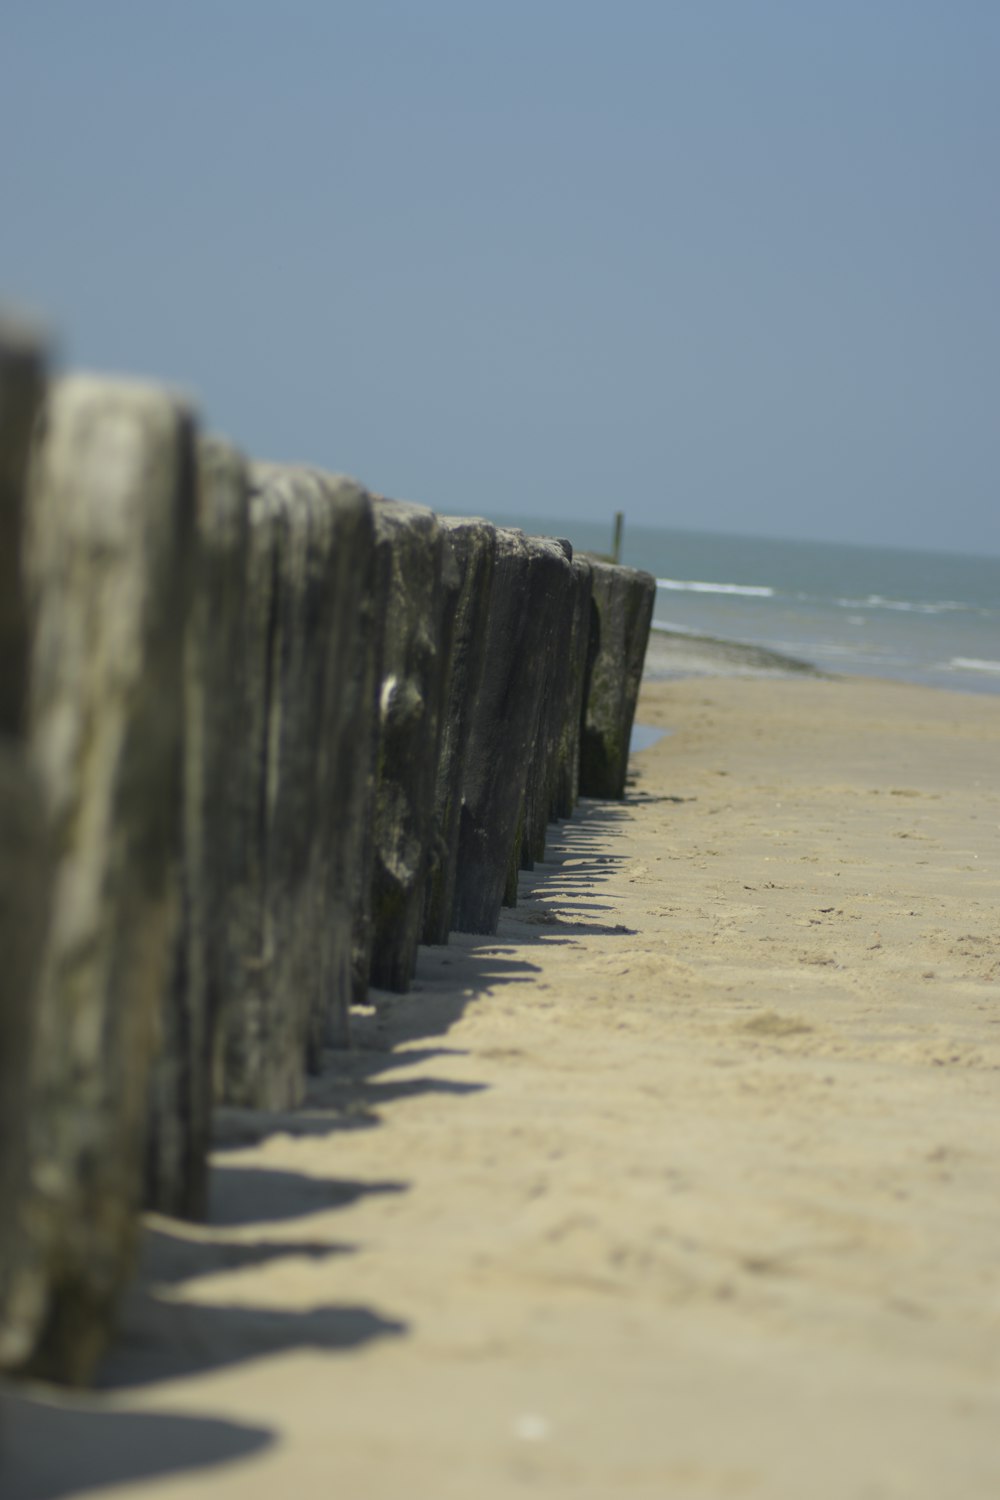 gray wooden fence on beach during daytime